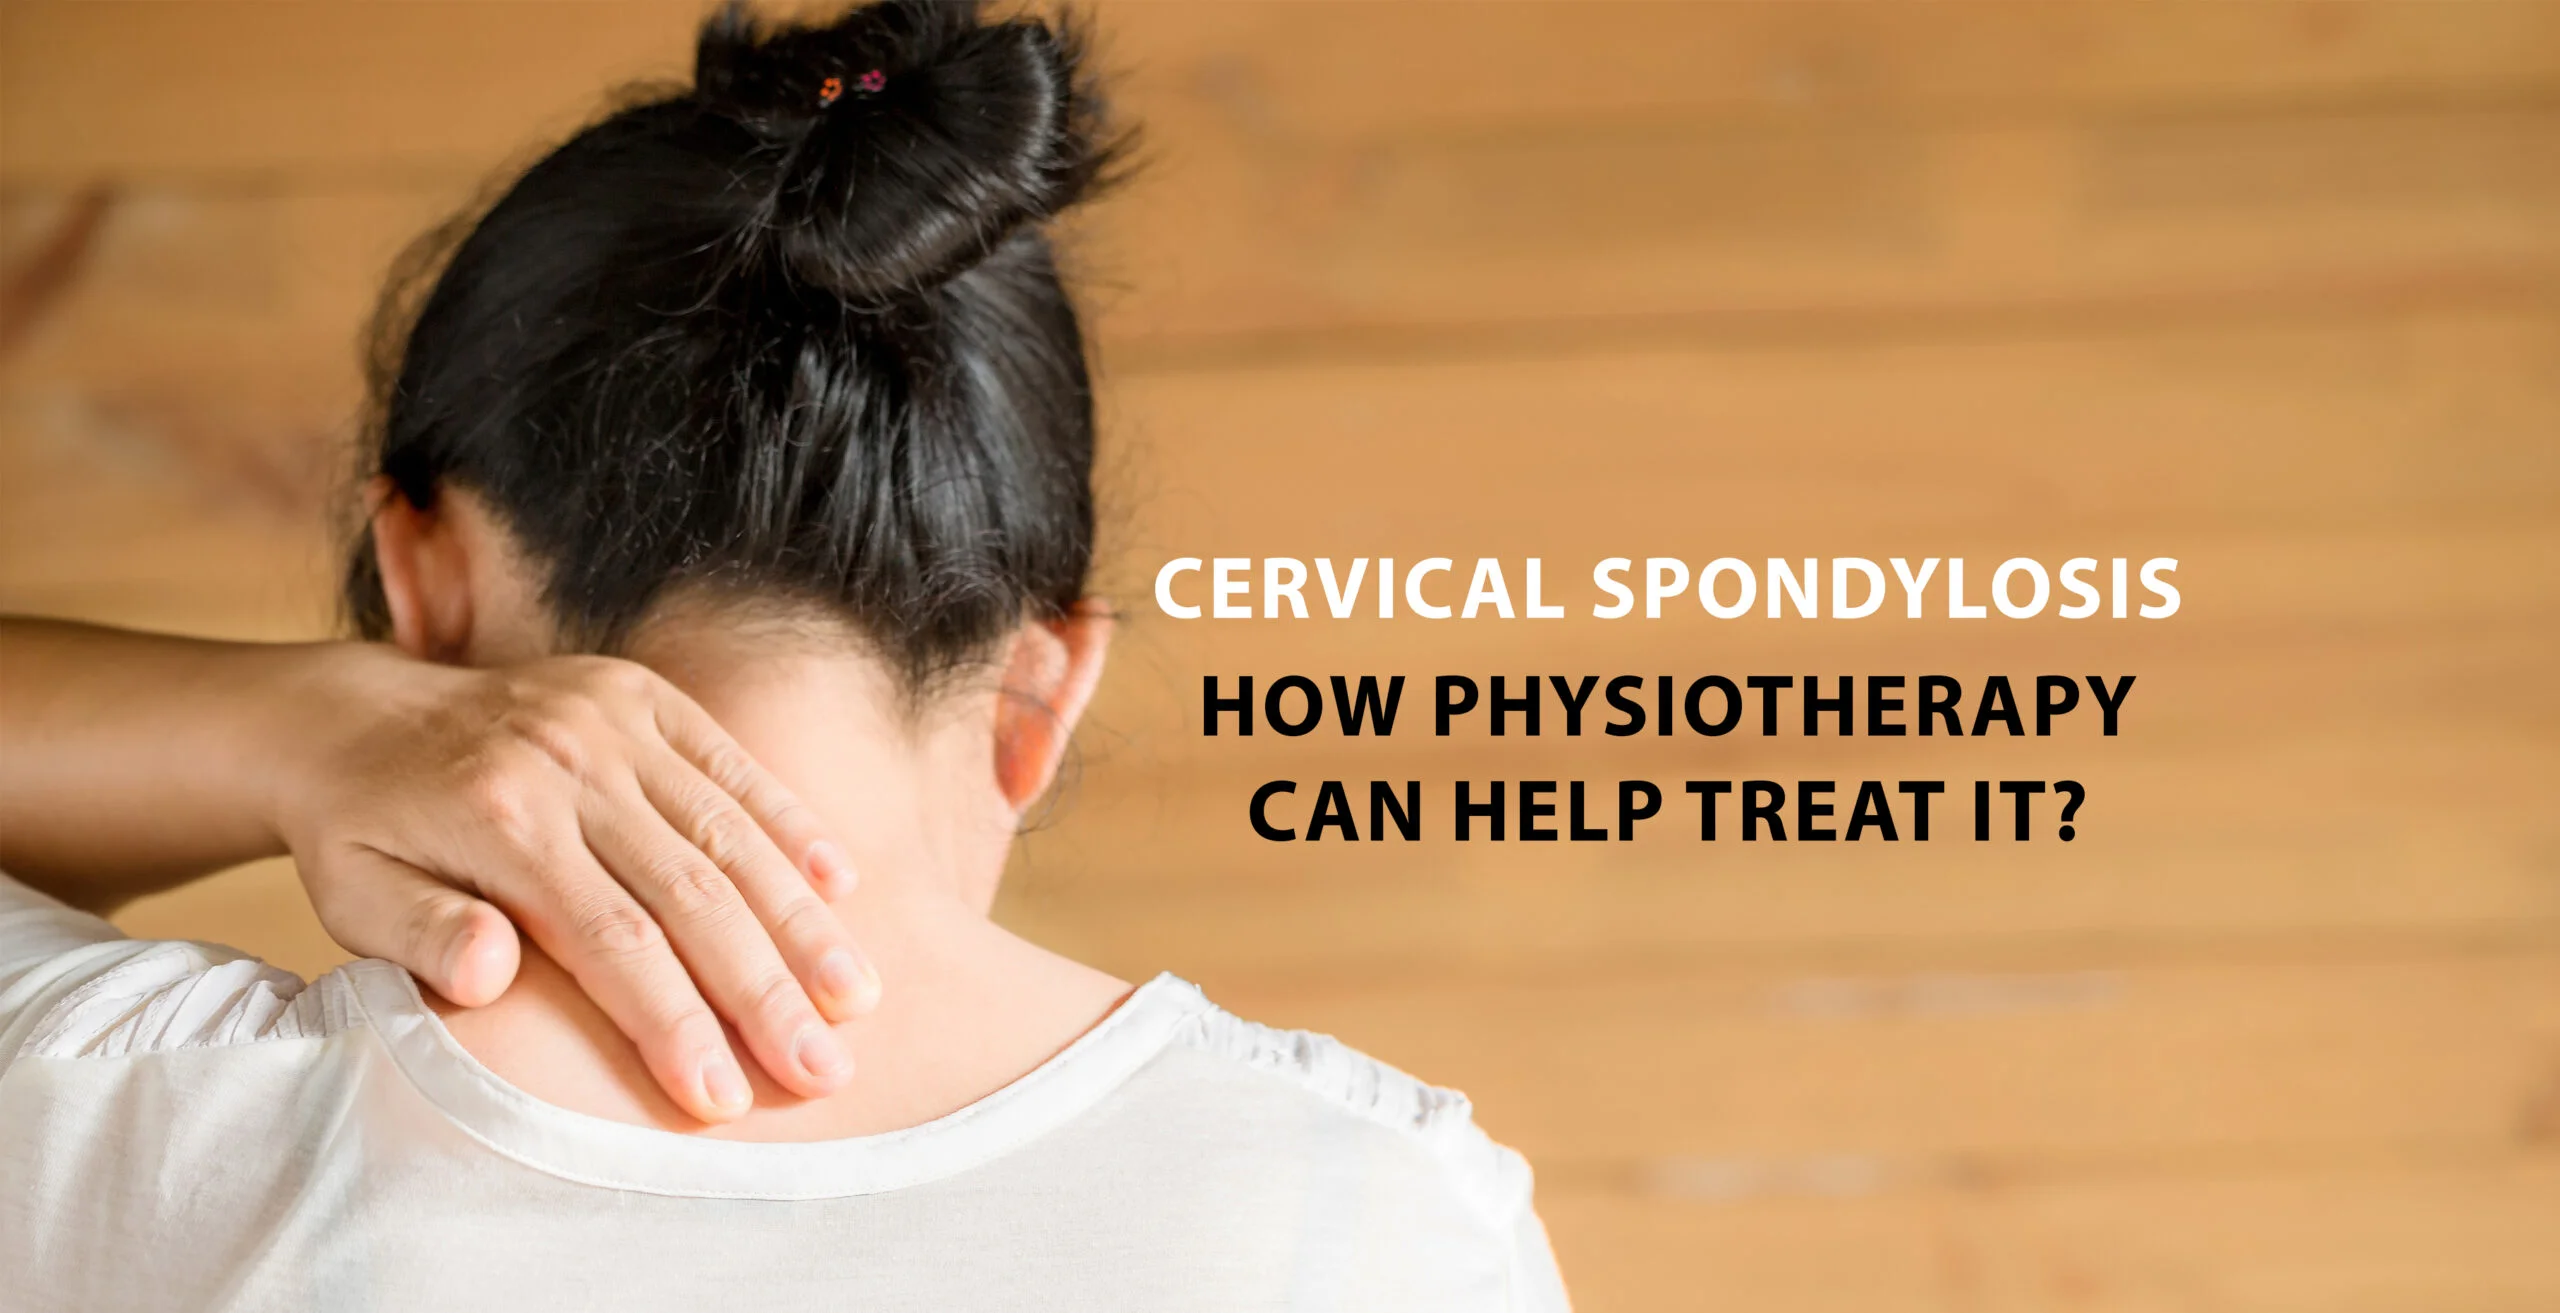 https://www.miracleshealth.com/assets/blog/assets/uploads/blog/Cervical Spondylosis - How Physiotherapy can help treat it